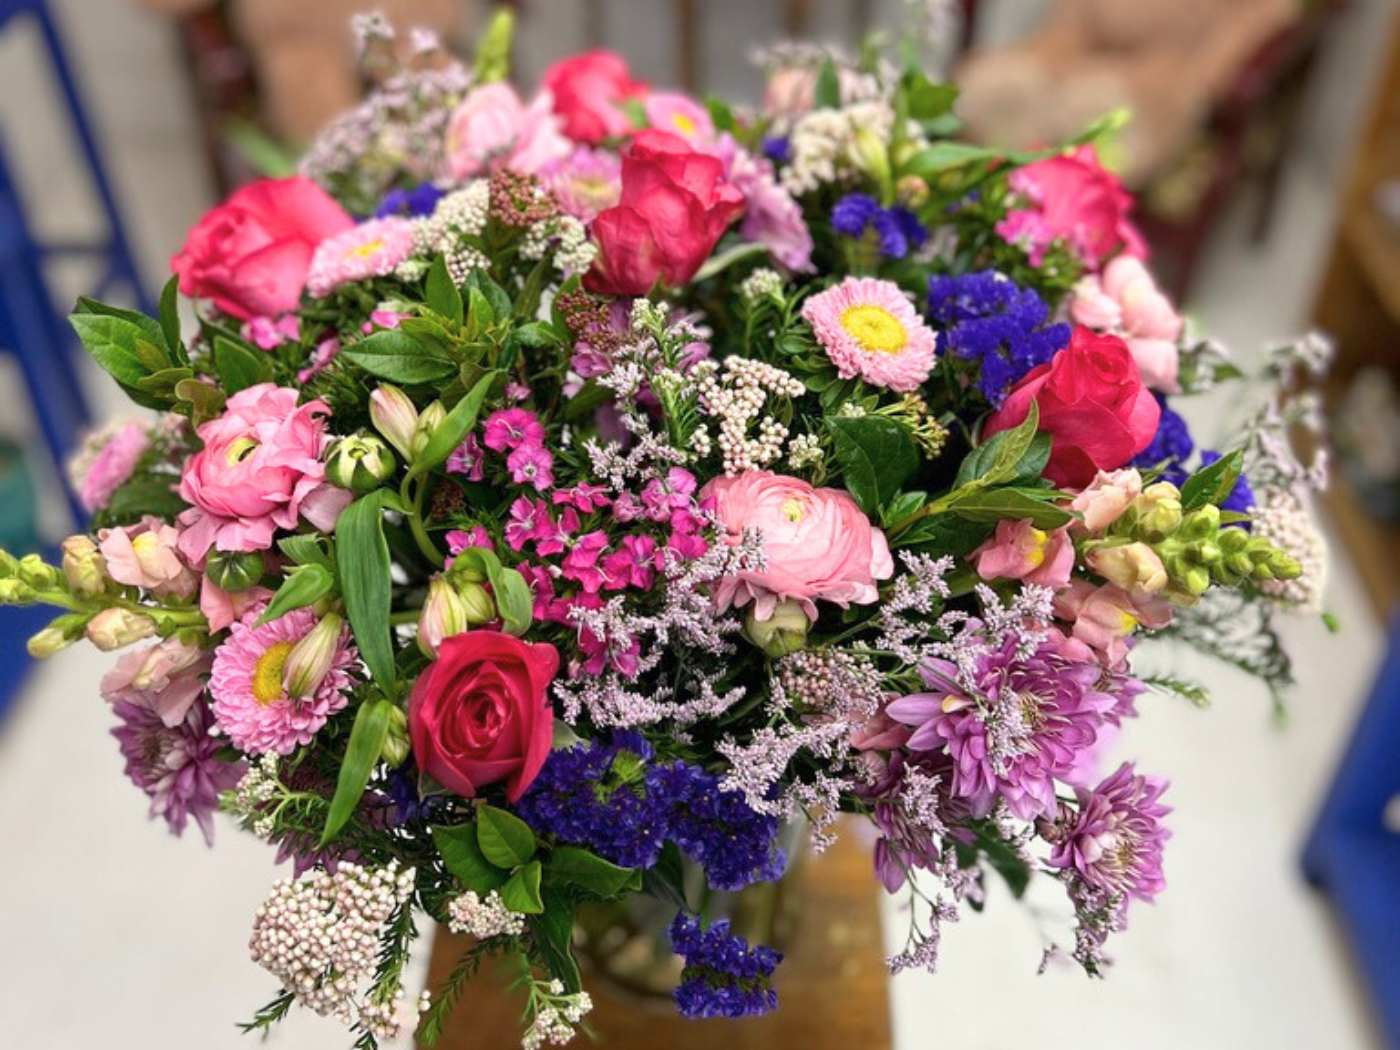 A vibrant bouquet overflowing with an assortment of flowers including pink roses, magenta asters, and delicate lilac blooms, elegantly arranged and featured as part of the Flowers By Occasion Collection at Fabulous Flowers and Gifts.